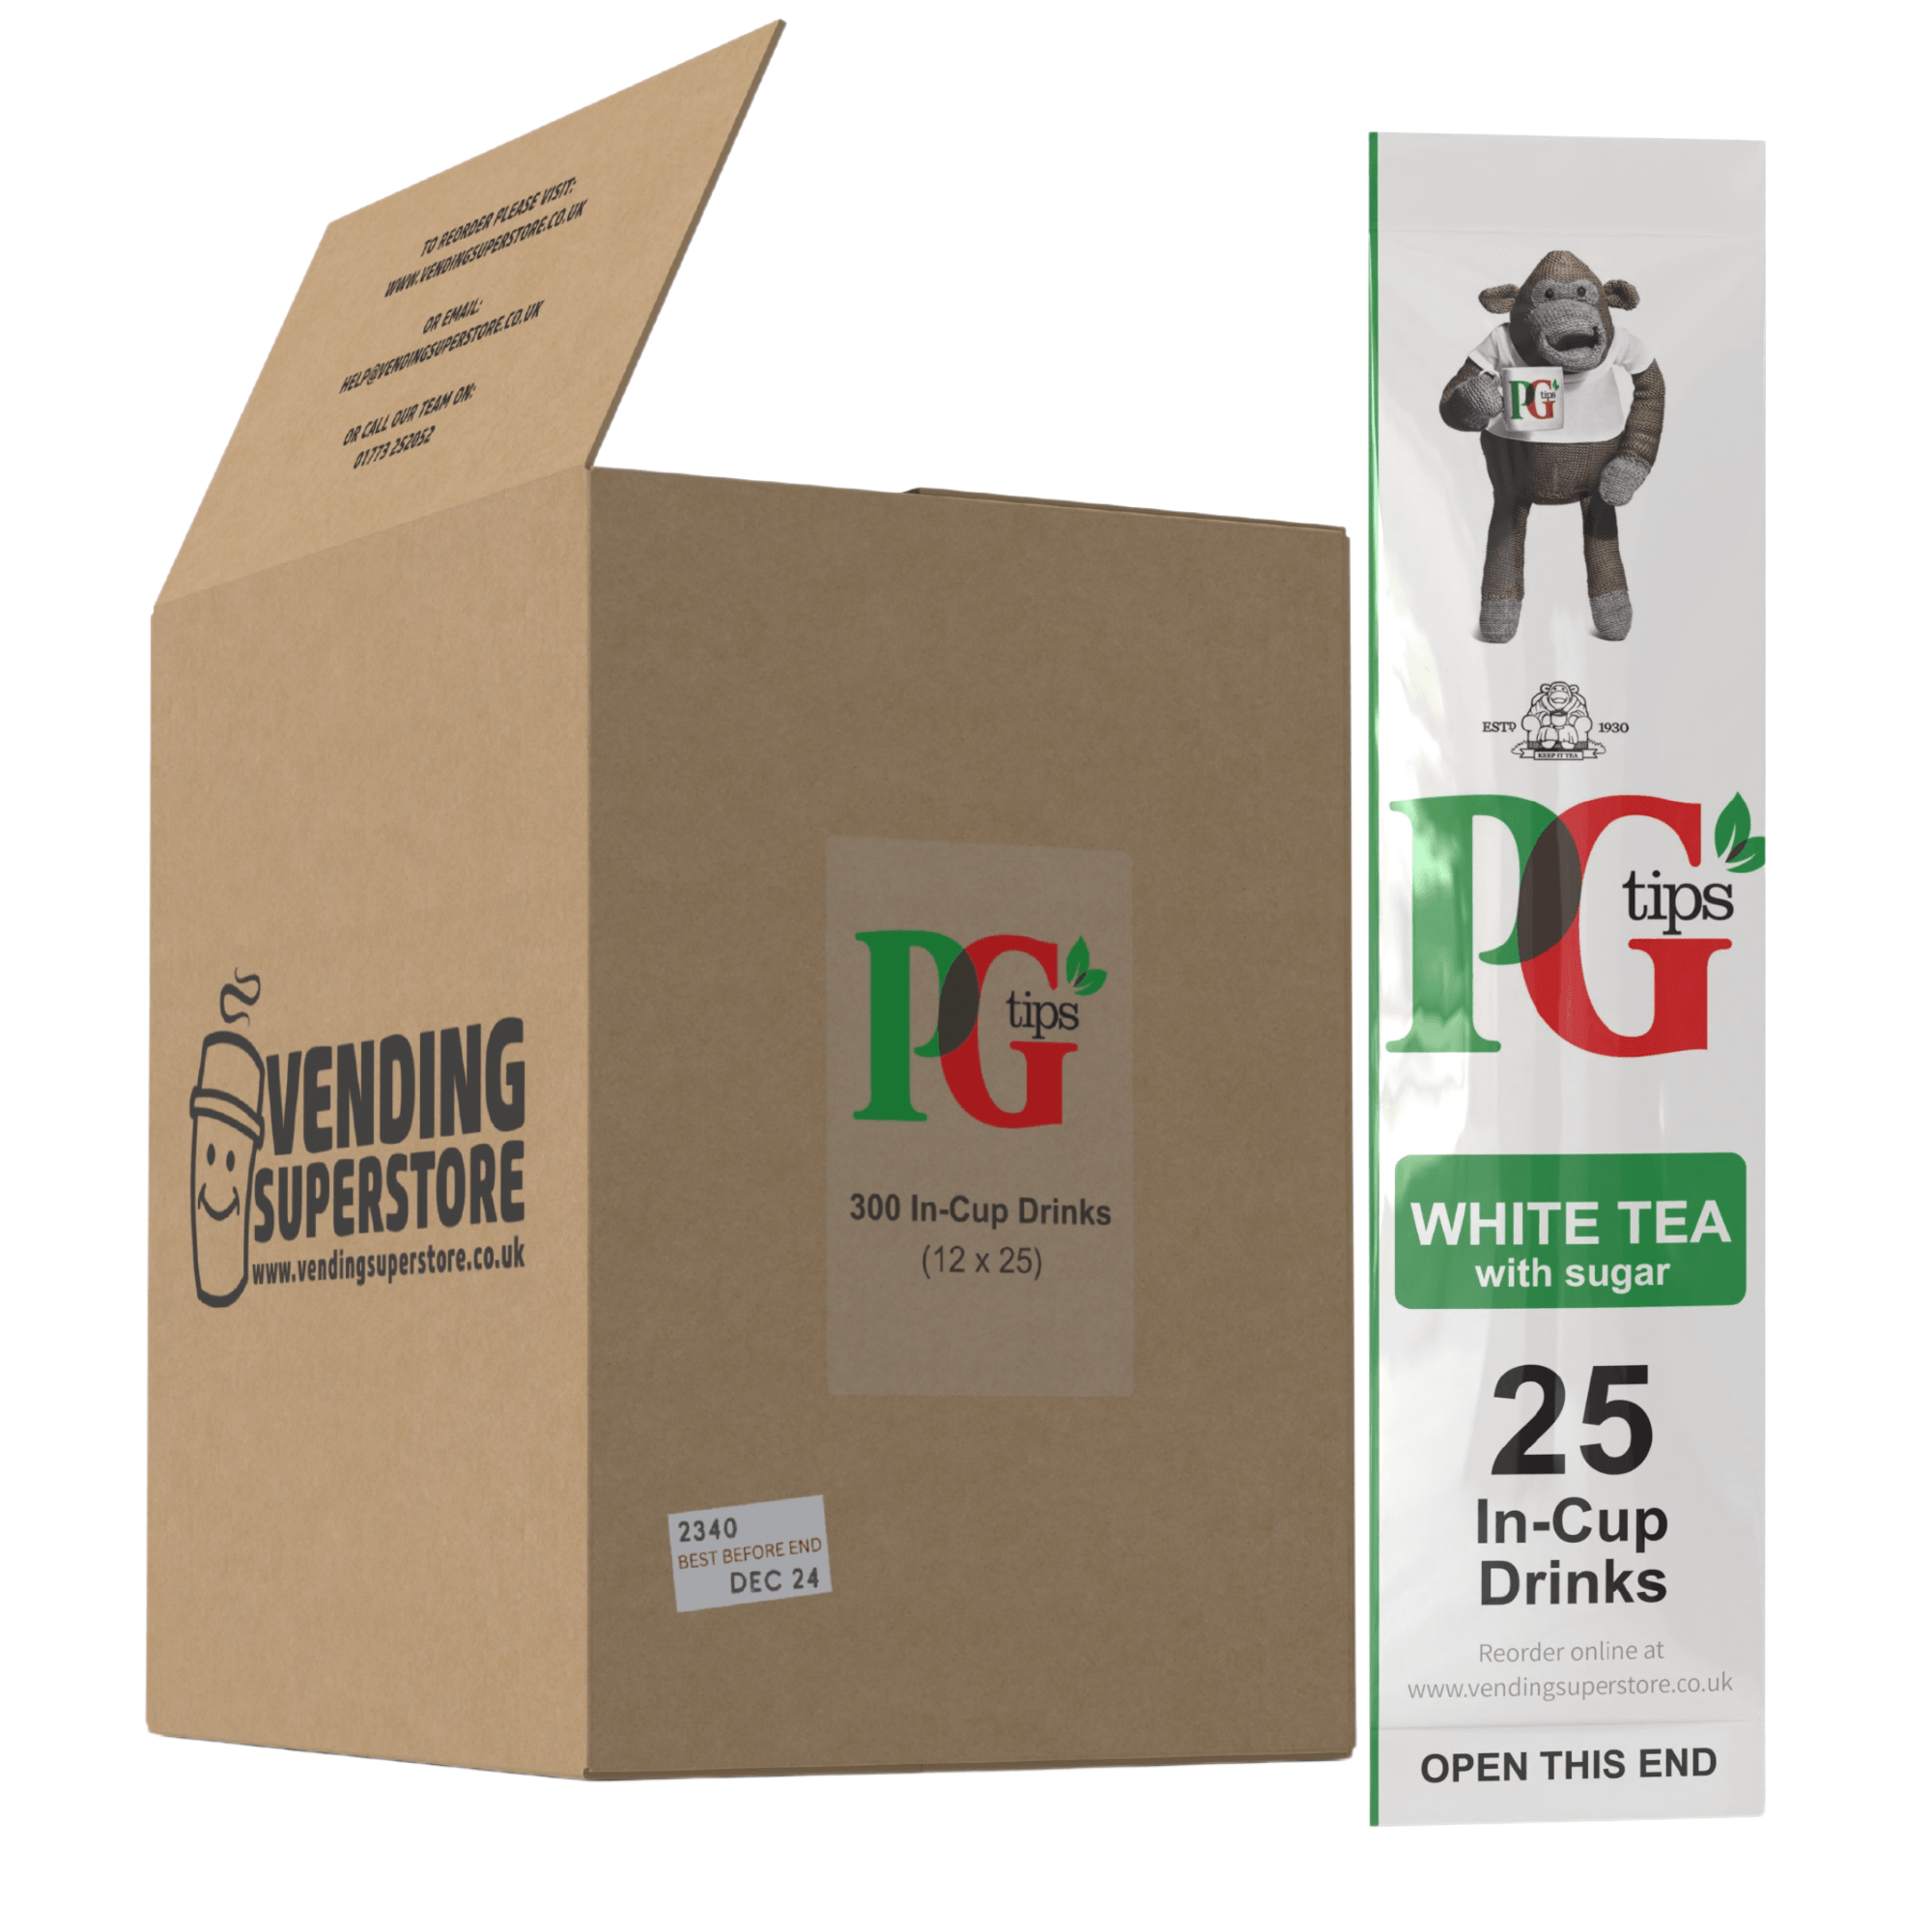 Incup Vending Drinks - PG Tips Tagged Tea White With Sugar - Case Of 300 Cups - Vending Superstore